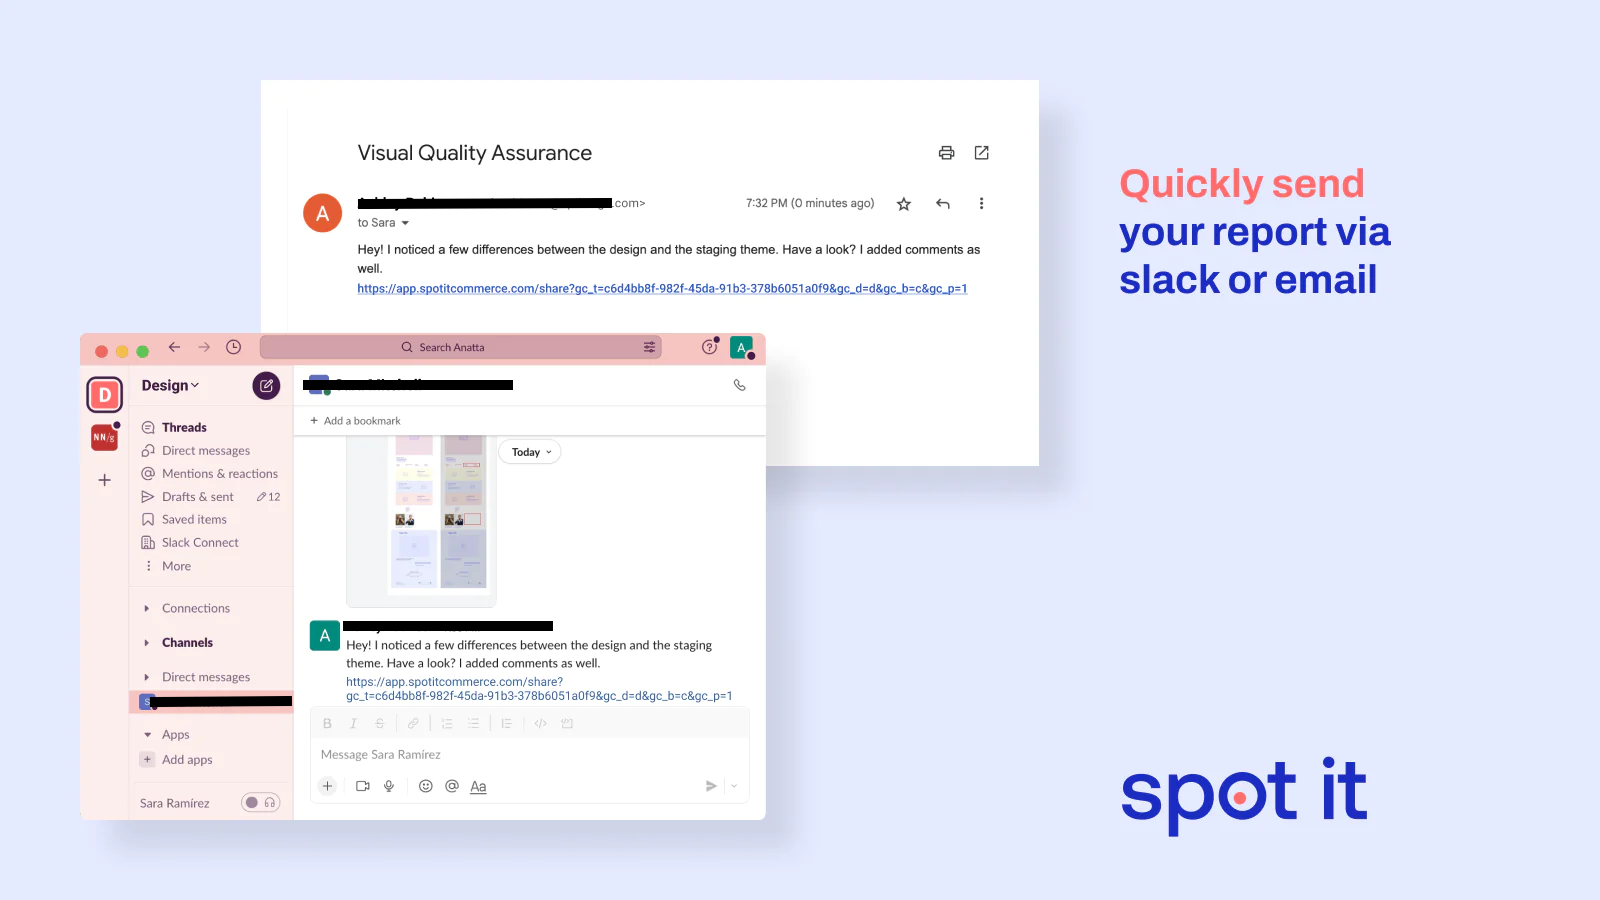 Quickly send your report via Slack or email